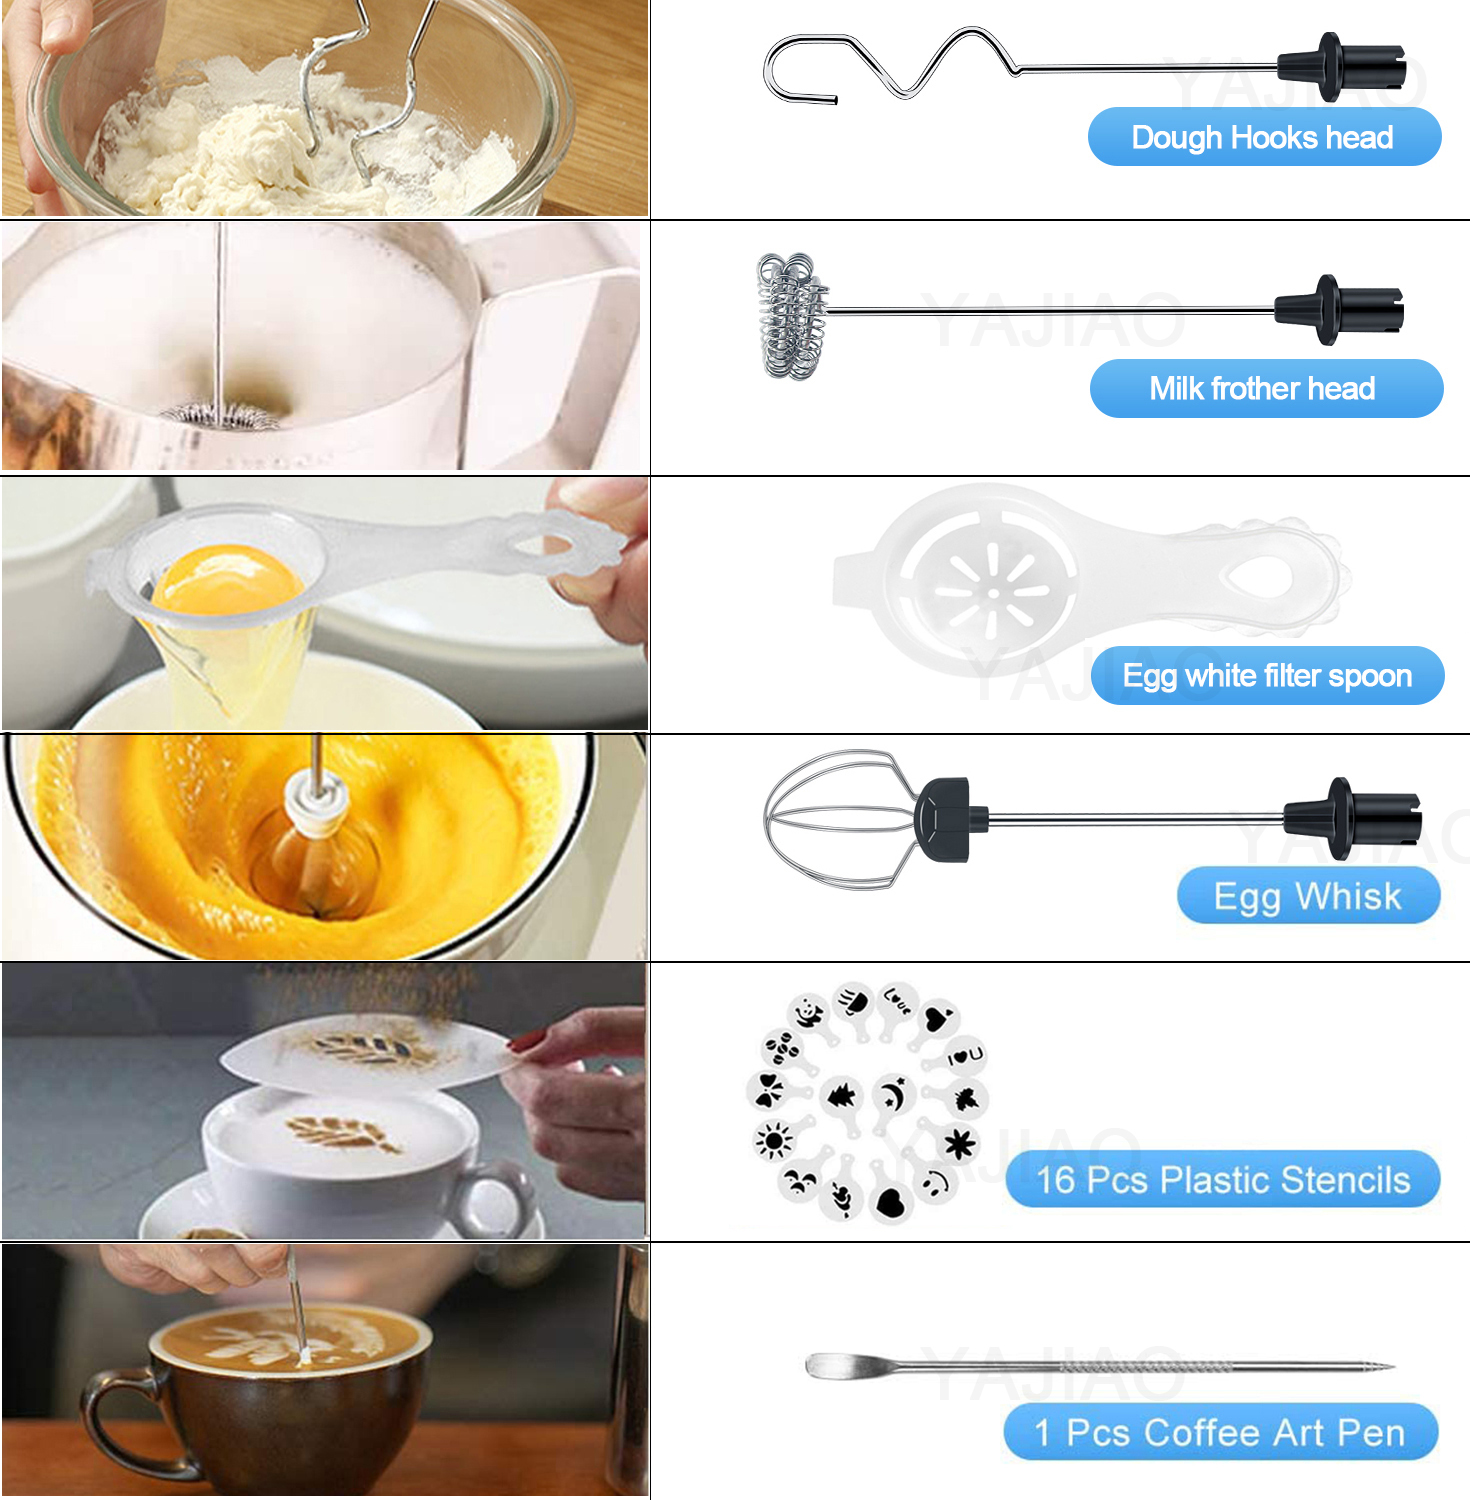 YAJIAO Rechargeable Milk Frother Handheld Electric Blender 3 Speed for Bulletproof Coffee Latte Cappuccino Hot Chocolate